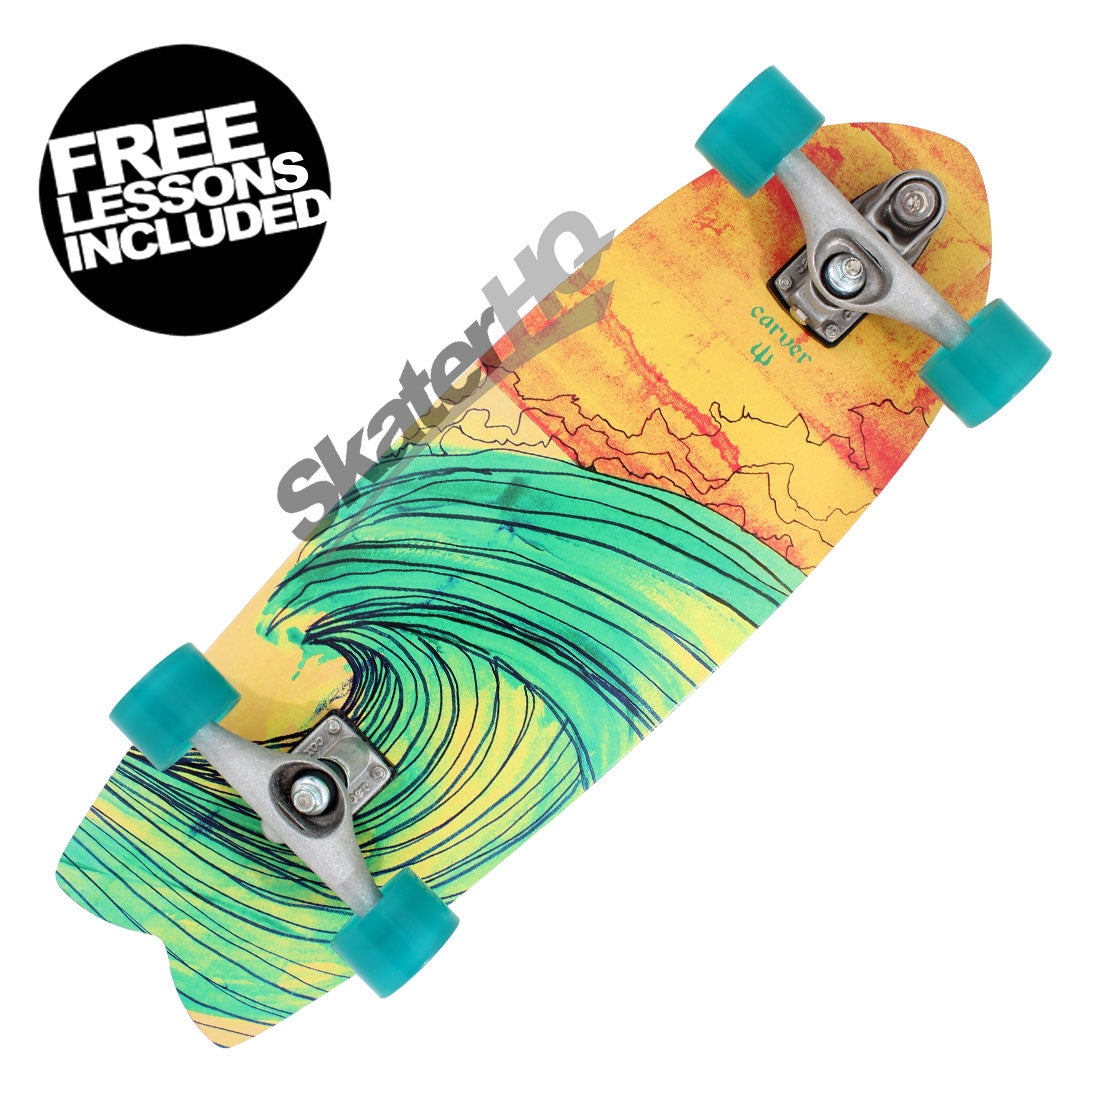 Carver Swallow C7 Raw Complete Skateboard Compl Carving and Specialty